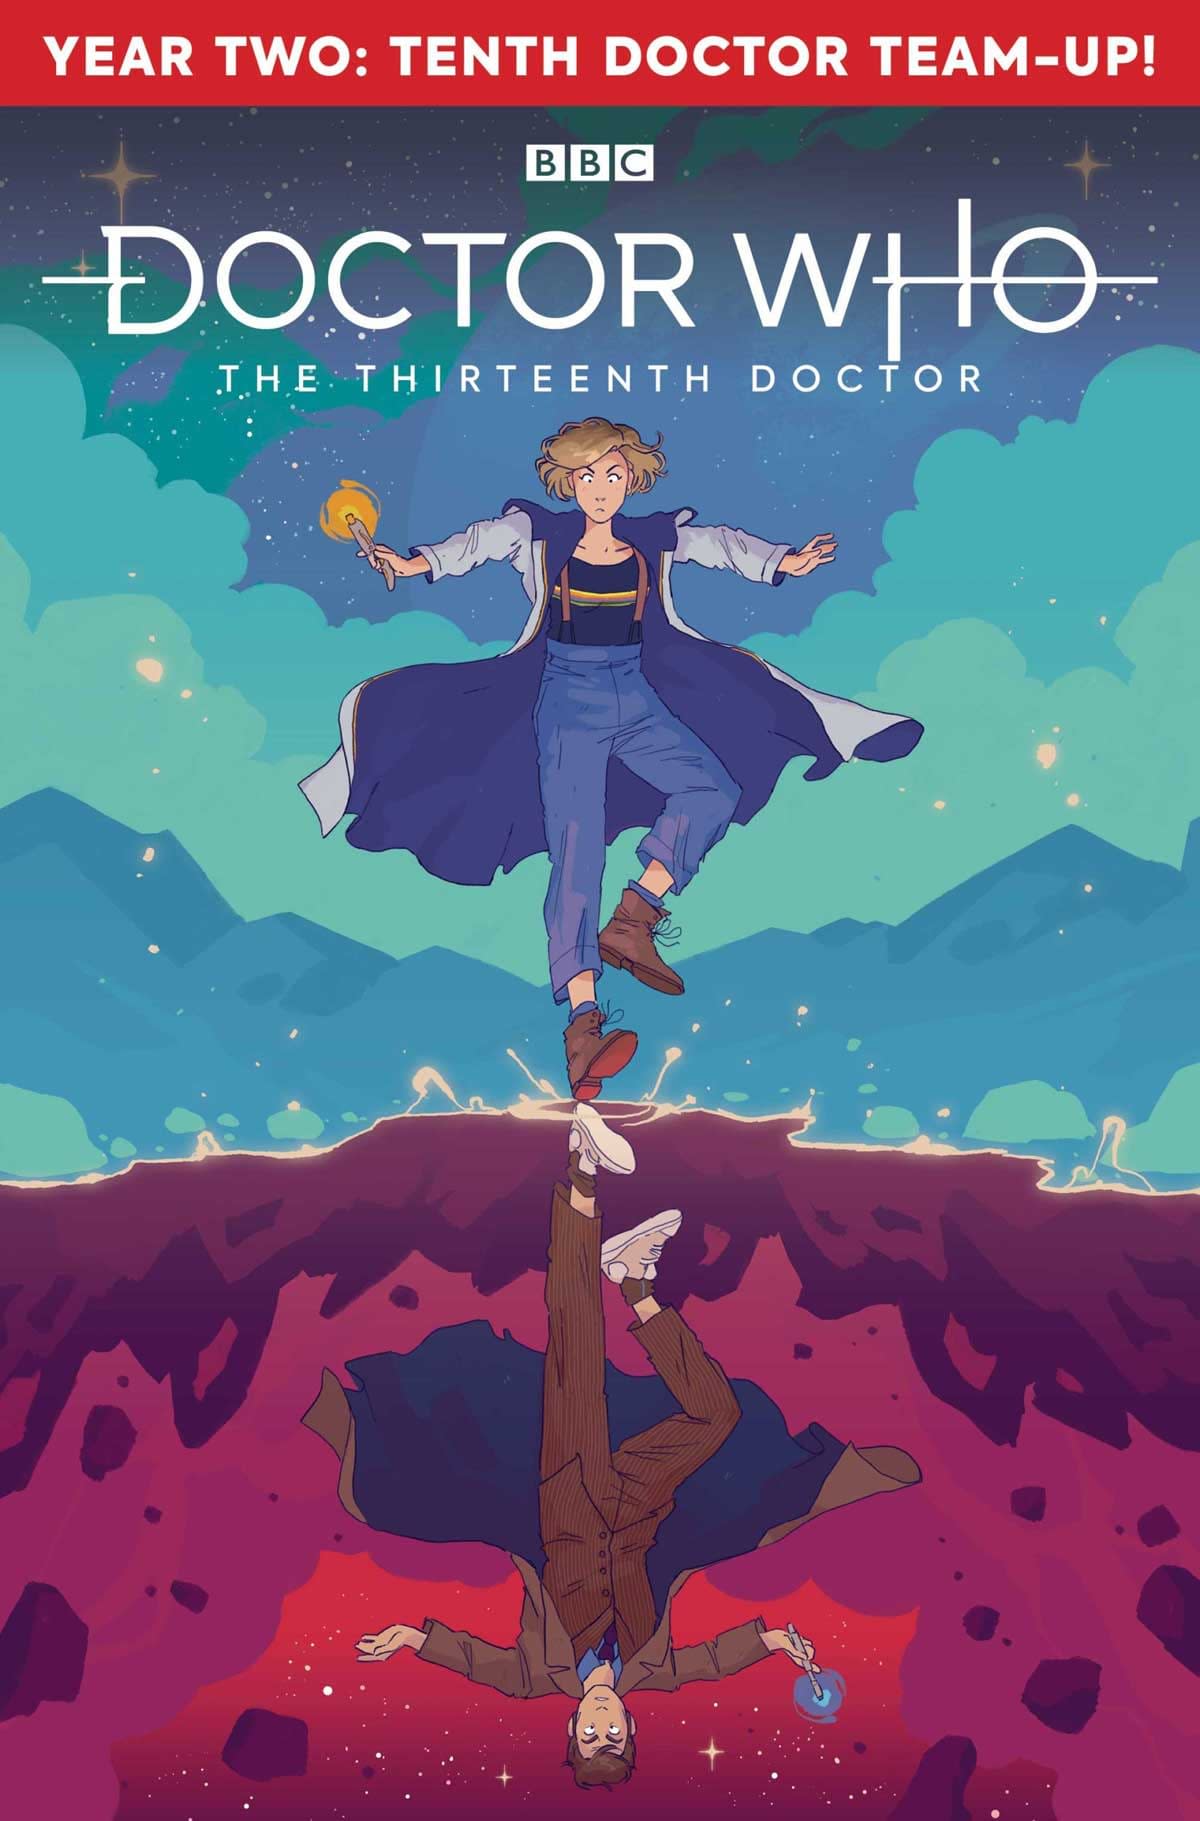 REVIEW: Doctor Who The Thirteenth Doctor Season Two #2 -- "A Decent Sized Dose Of Dr. Martha Jones"